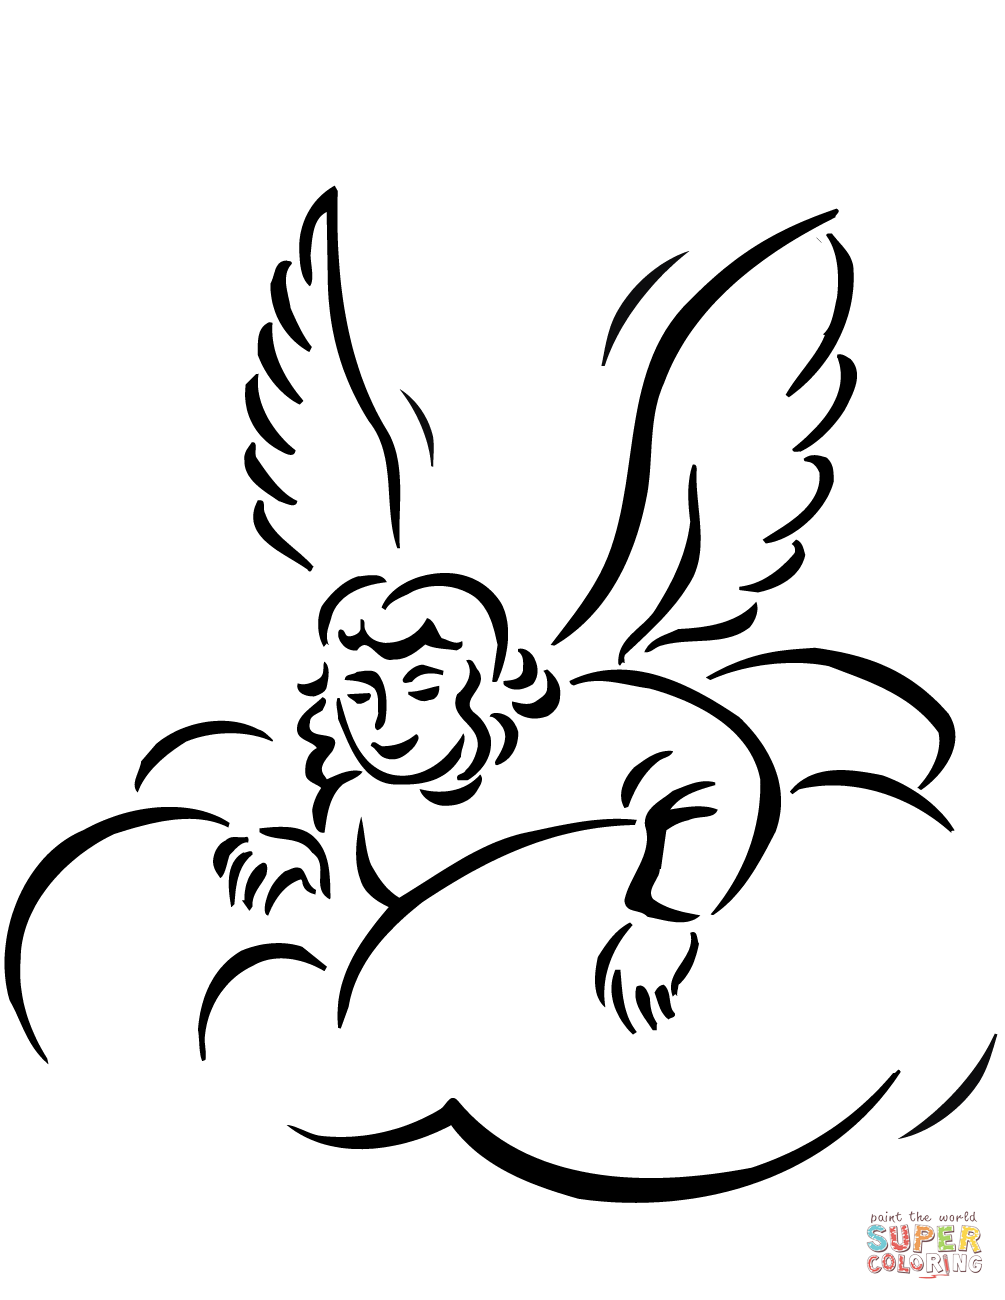 Coloring Pages : Angel In Cloudsing Page Free Printable ...